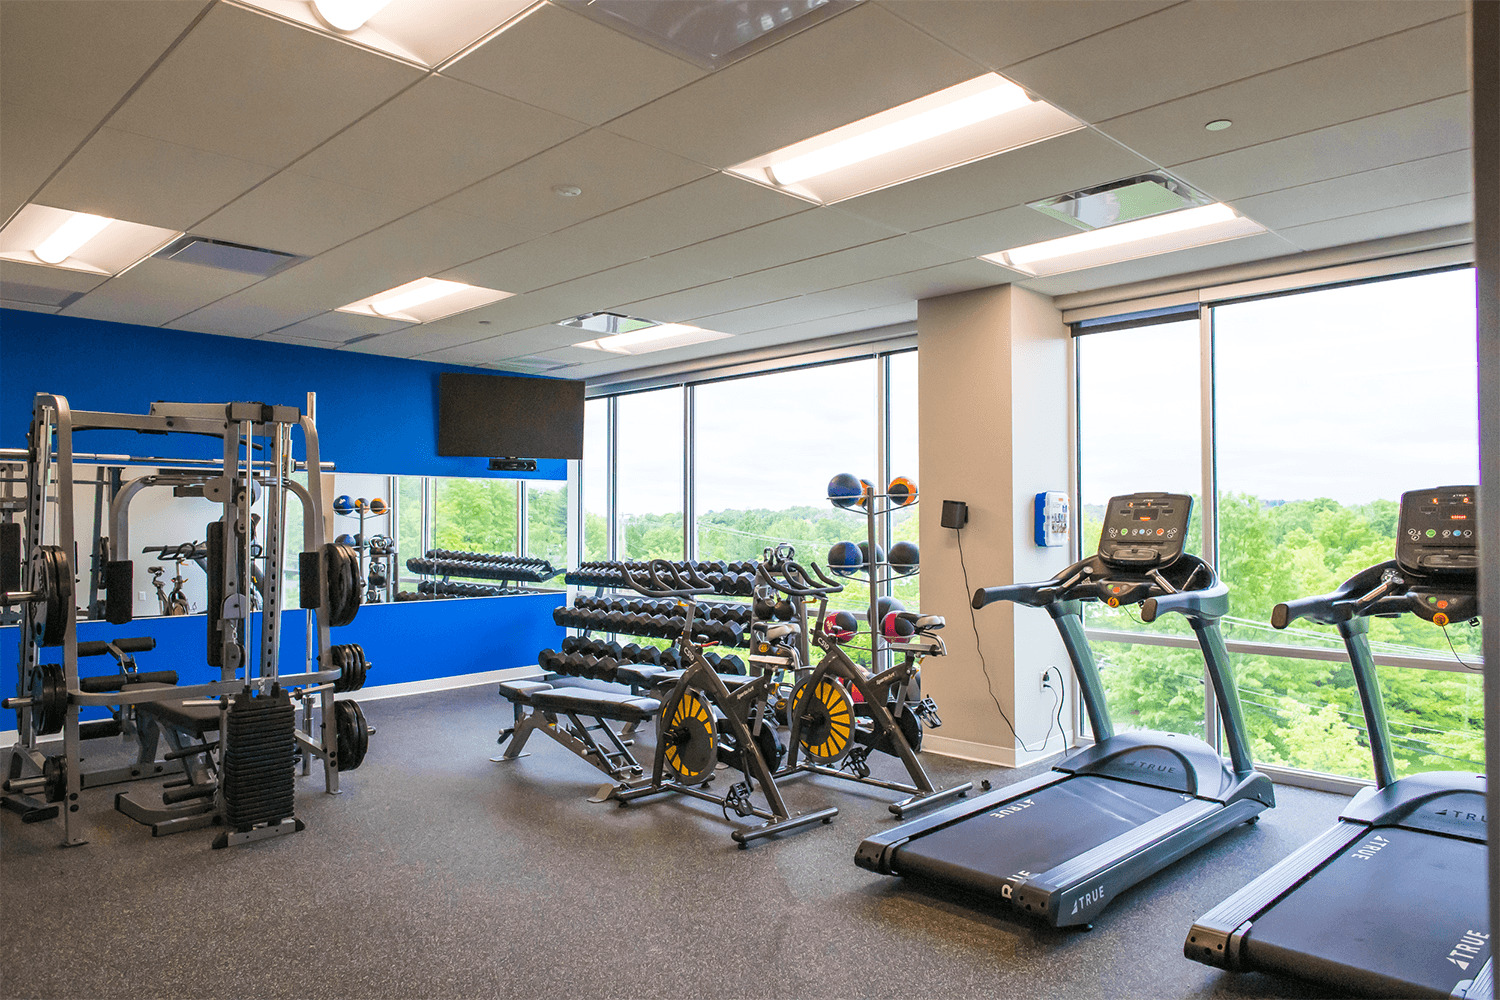 gym with treadmills, and weights, with floor-to-ceiling windows